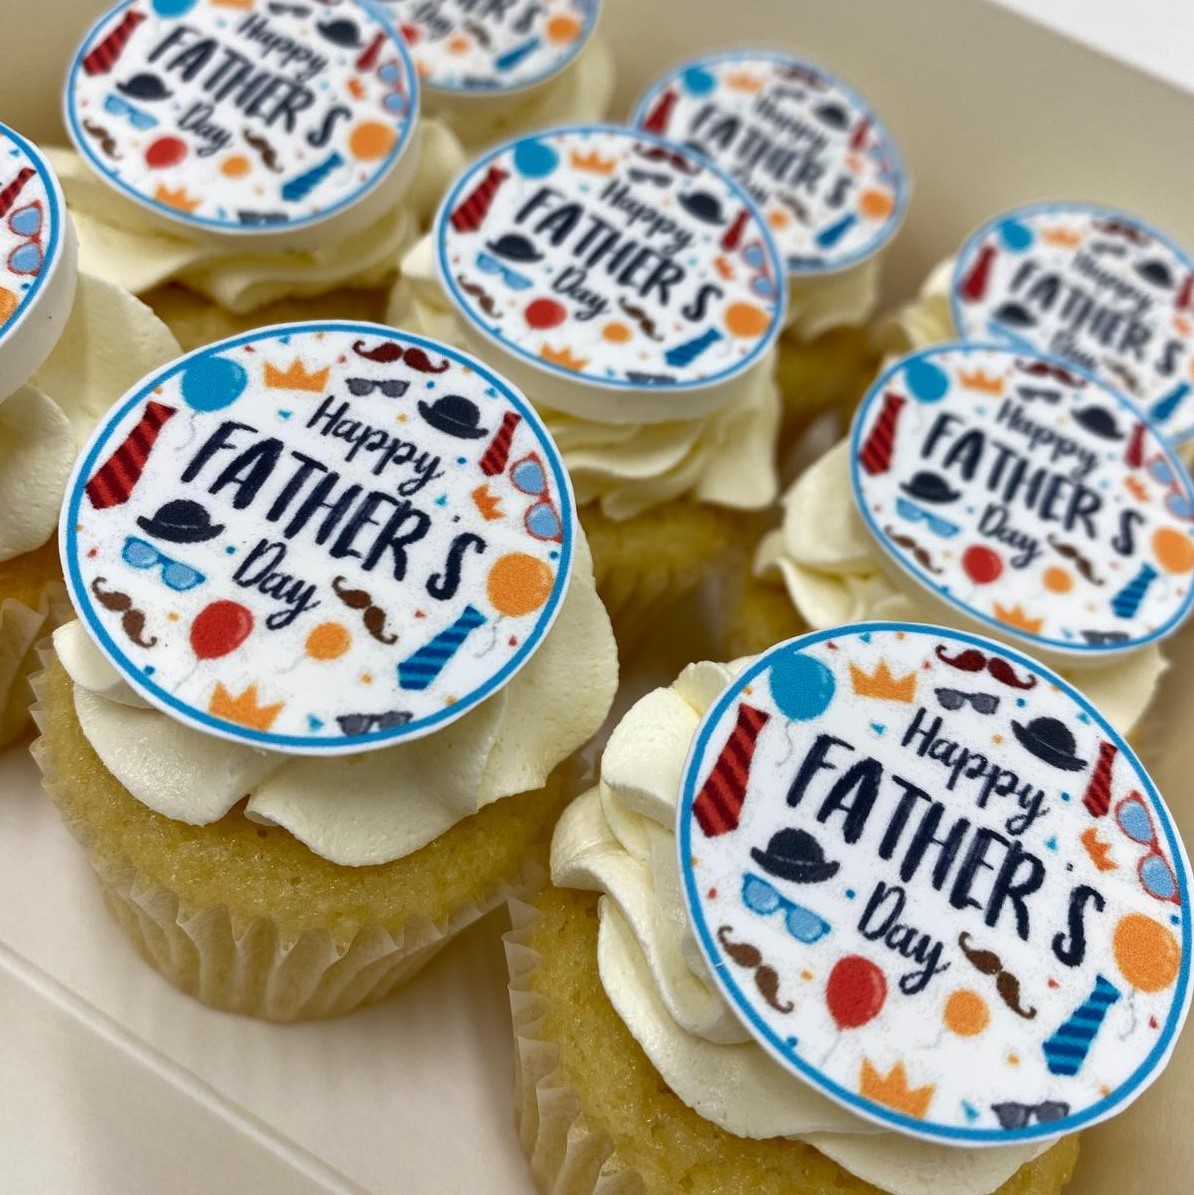 FATHER'S DAY CUPCAKES